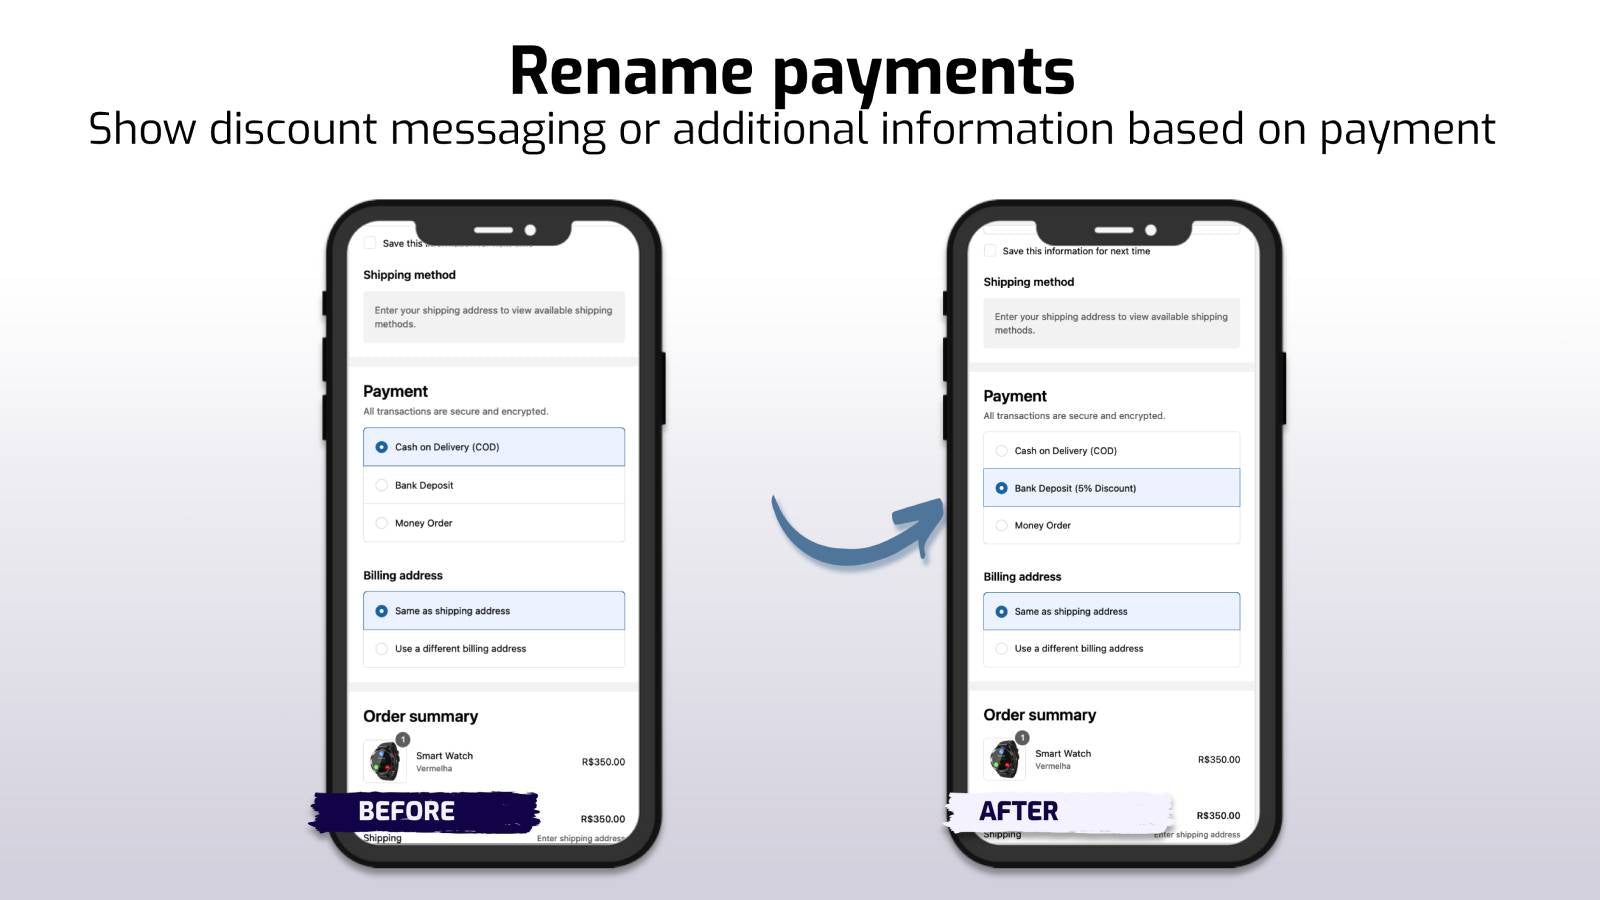 Rename payments based on conditions (mobile example)